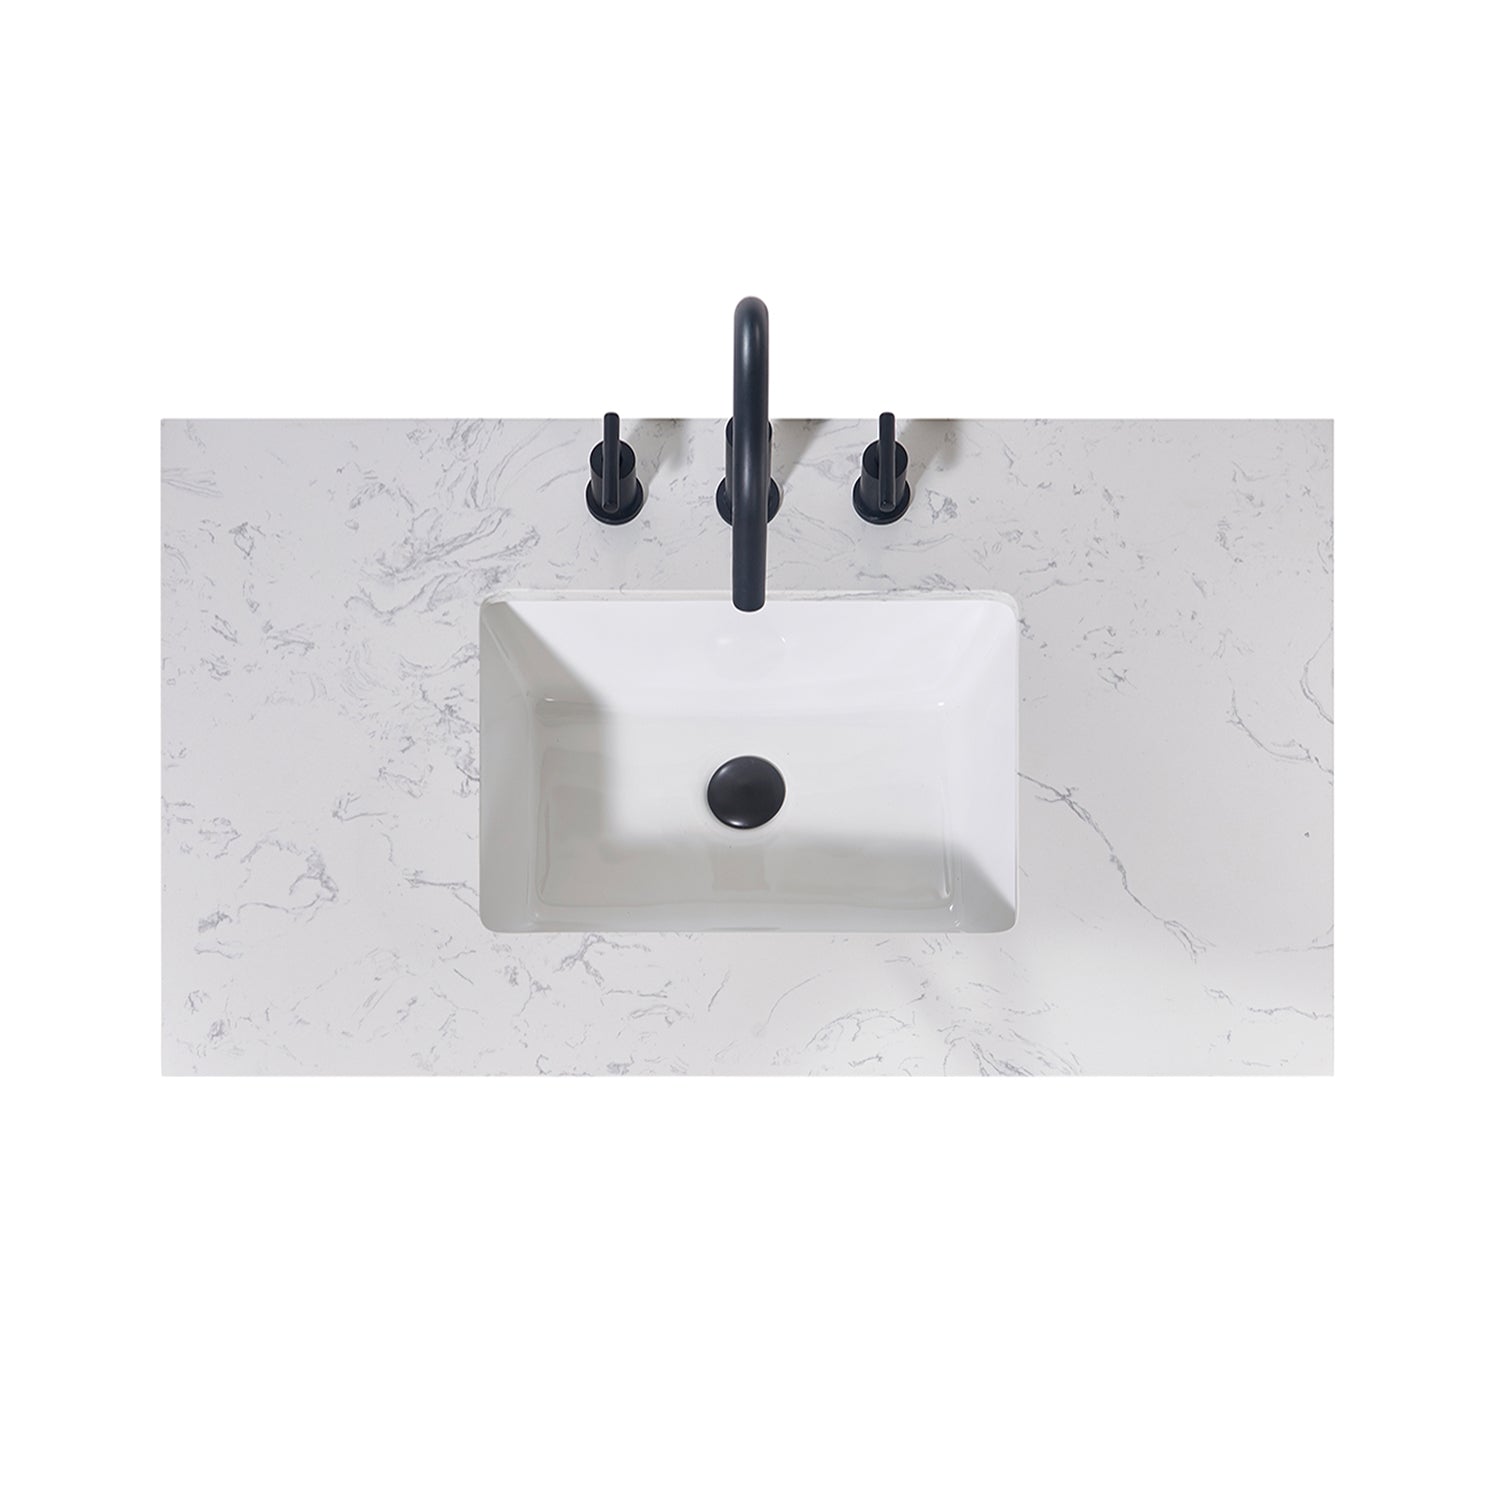 Merano Stone effects Single Sink Vanity Top in Aosta White Apron with White Sink